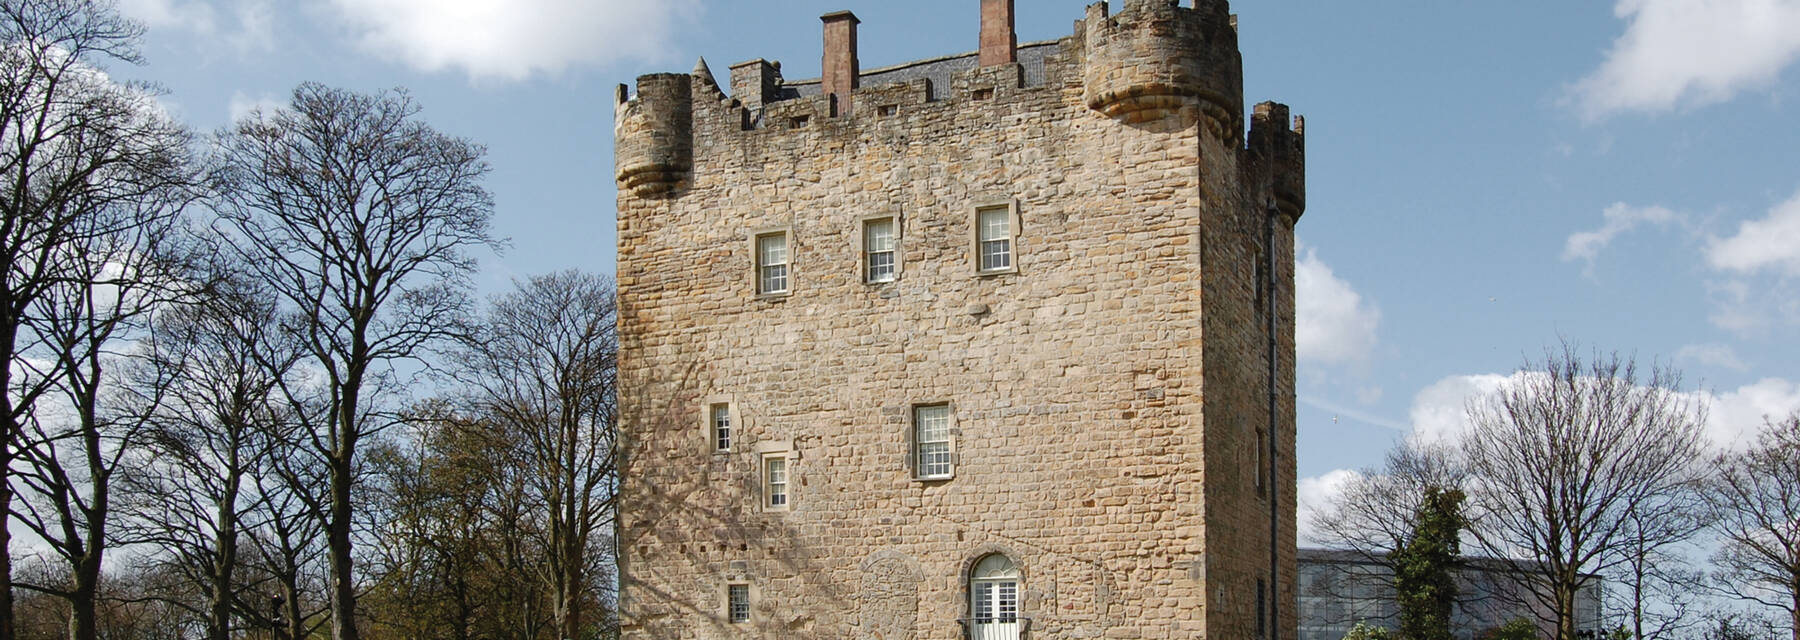 Exterior of Alloa Tower surrounded by bare trees in winter